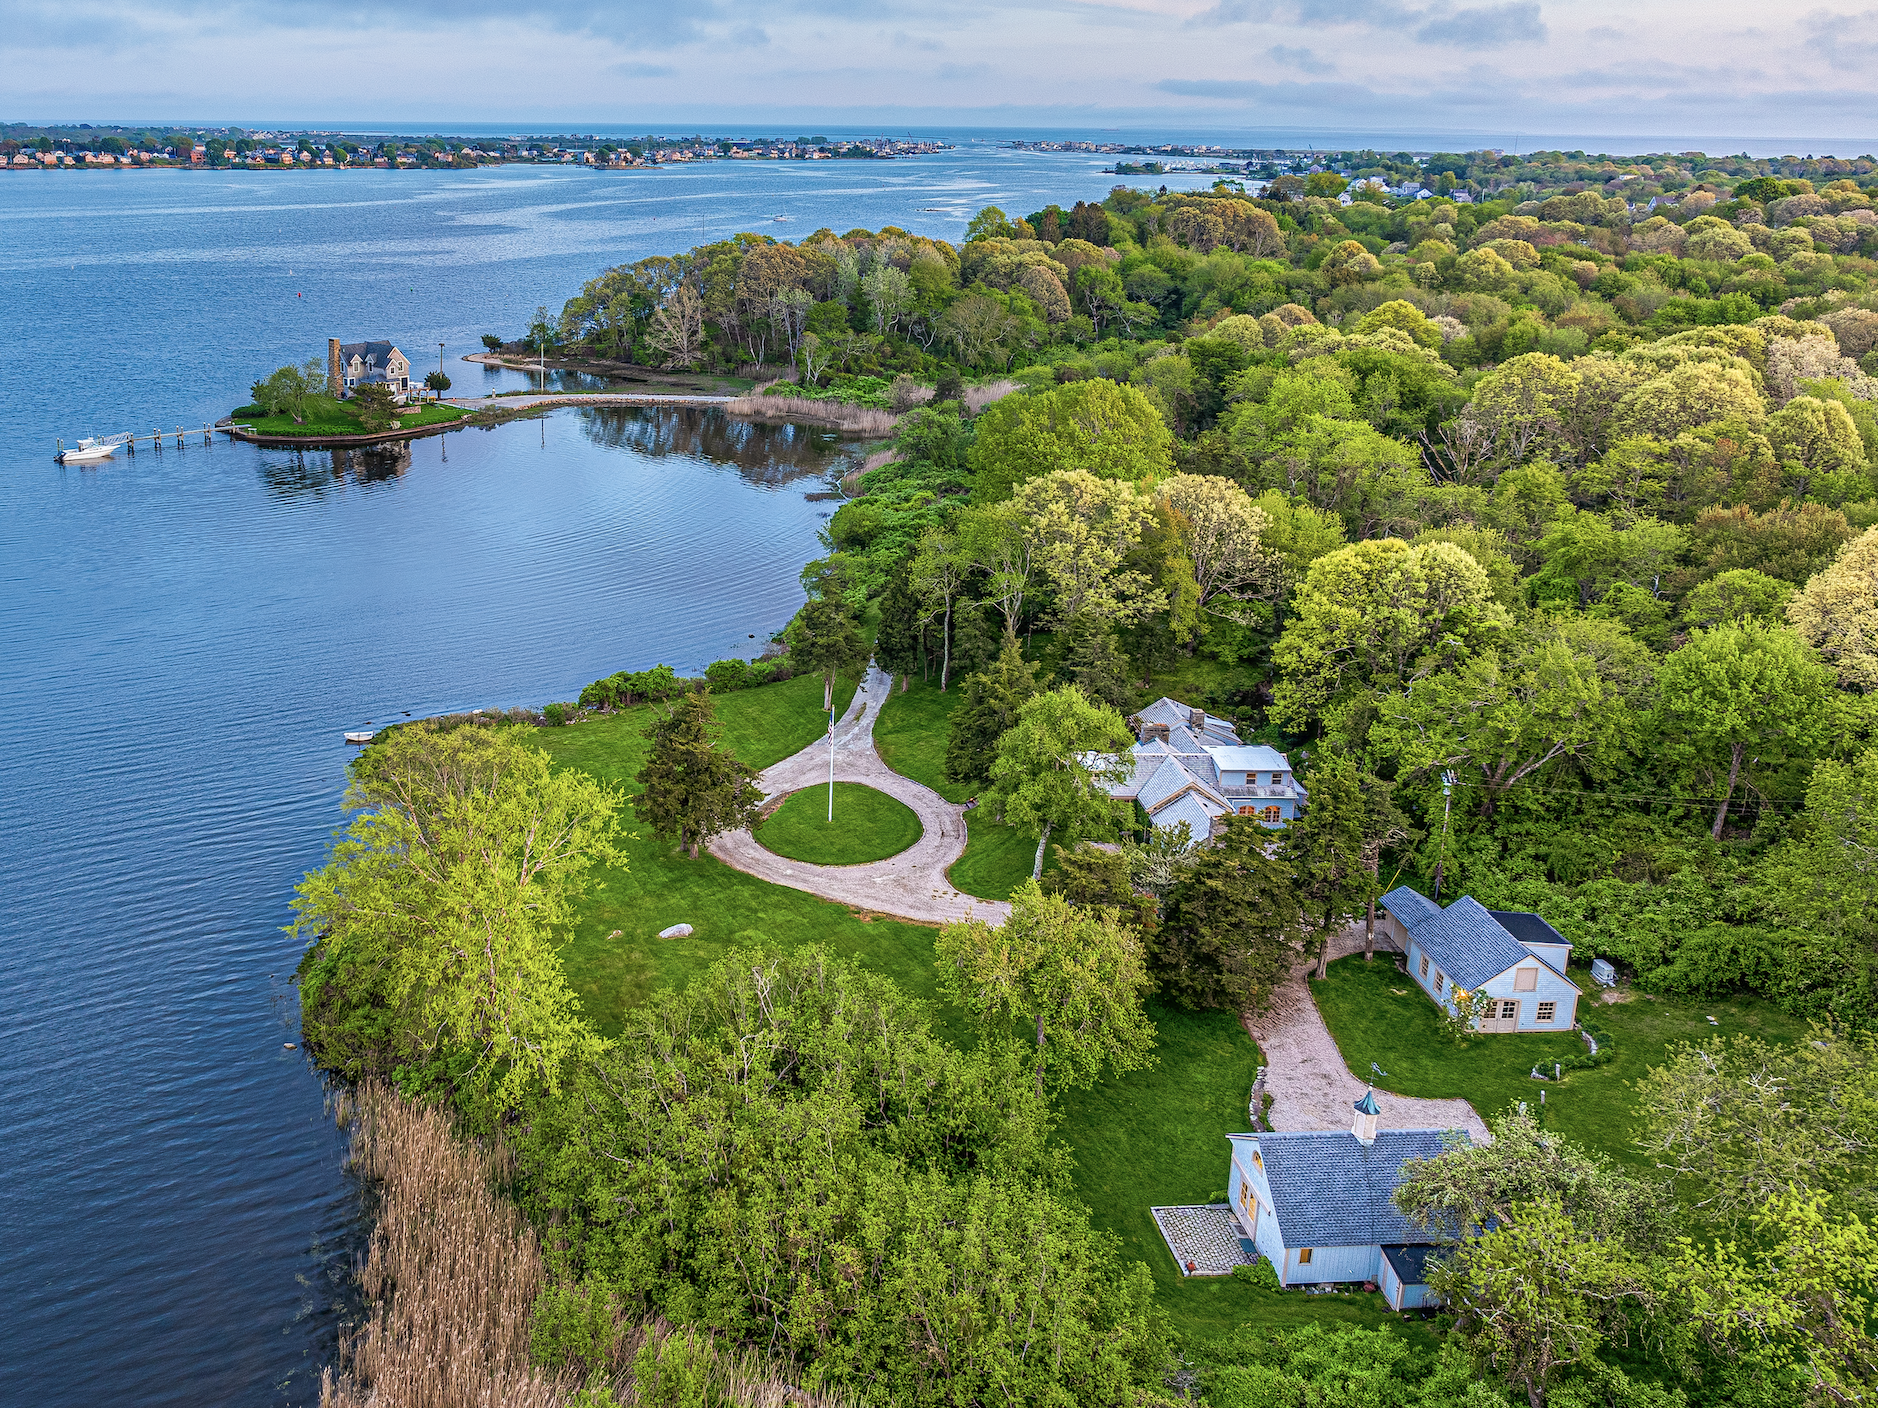 DAN & NICOLE HARDING OF LILA DELMAN COMPASS, REPRESENT SELLER  IN SIGNIFICANT SOUTH KINGSTOWN SALE.